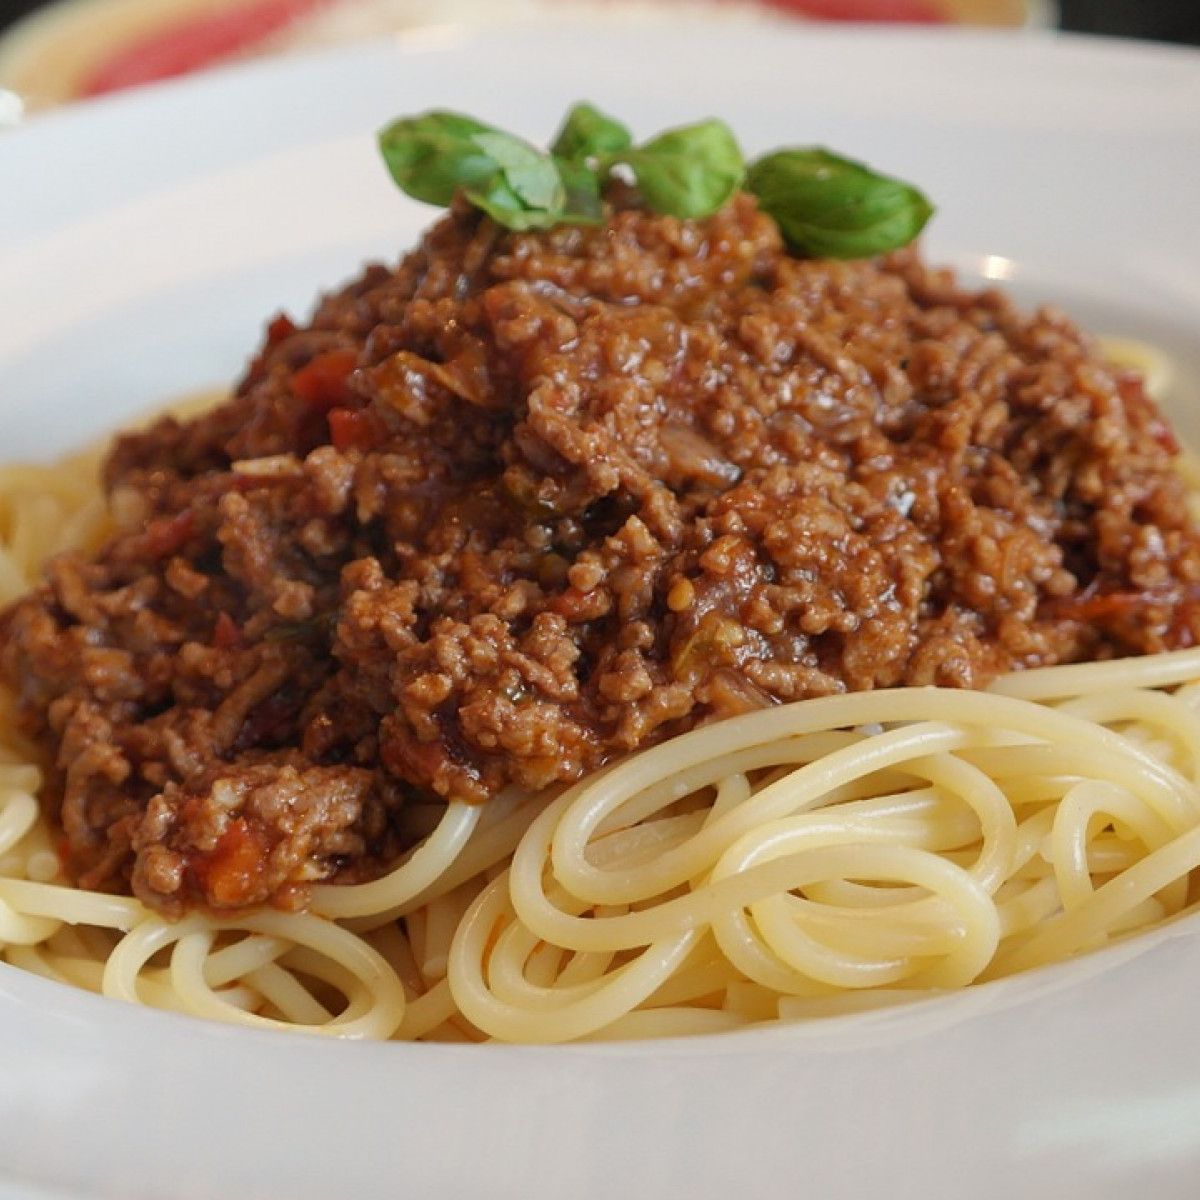 Spaghetti Bolognese and Diavola Pizza: the perfect duo that